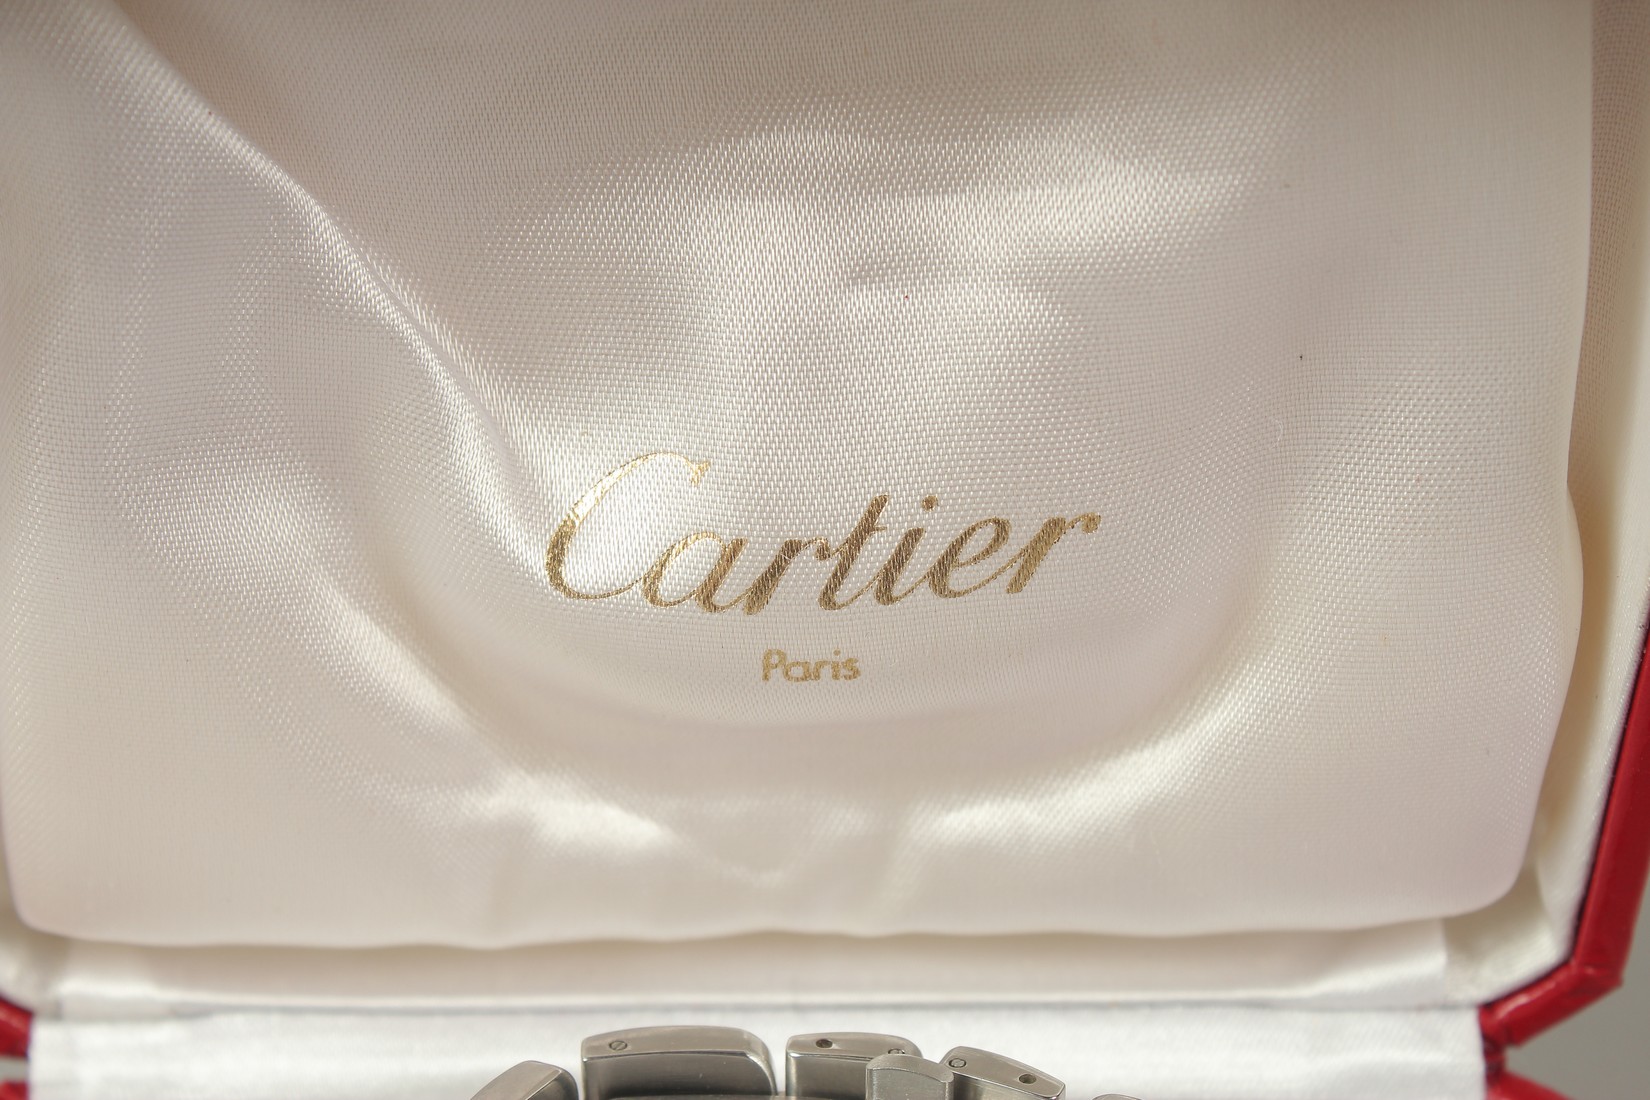 A CARTIER SWISS MADE STAINLESS STEEL WRISTWATCH, water resistant, 3 ATM, four dials, mother-of-pearl - Image 8 of 10